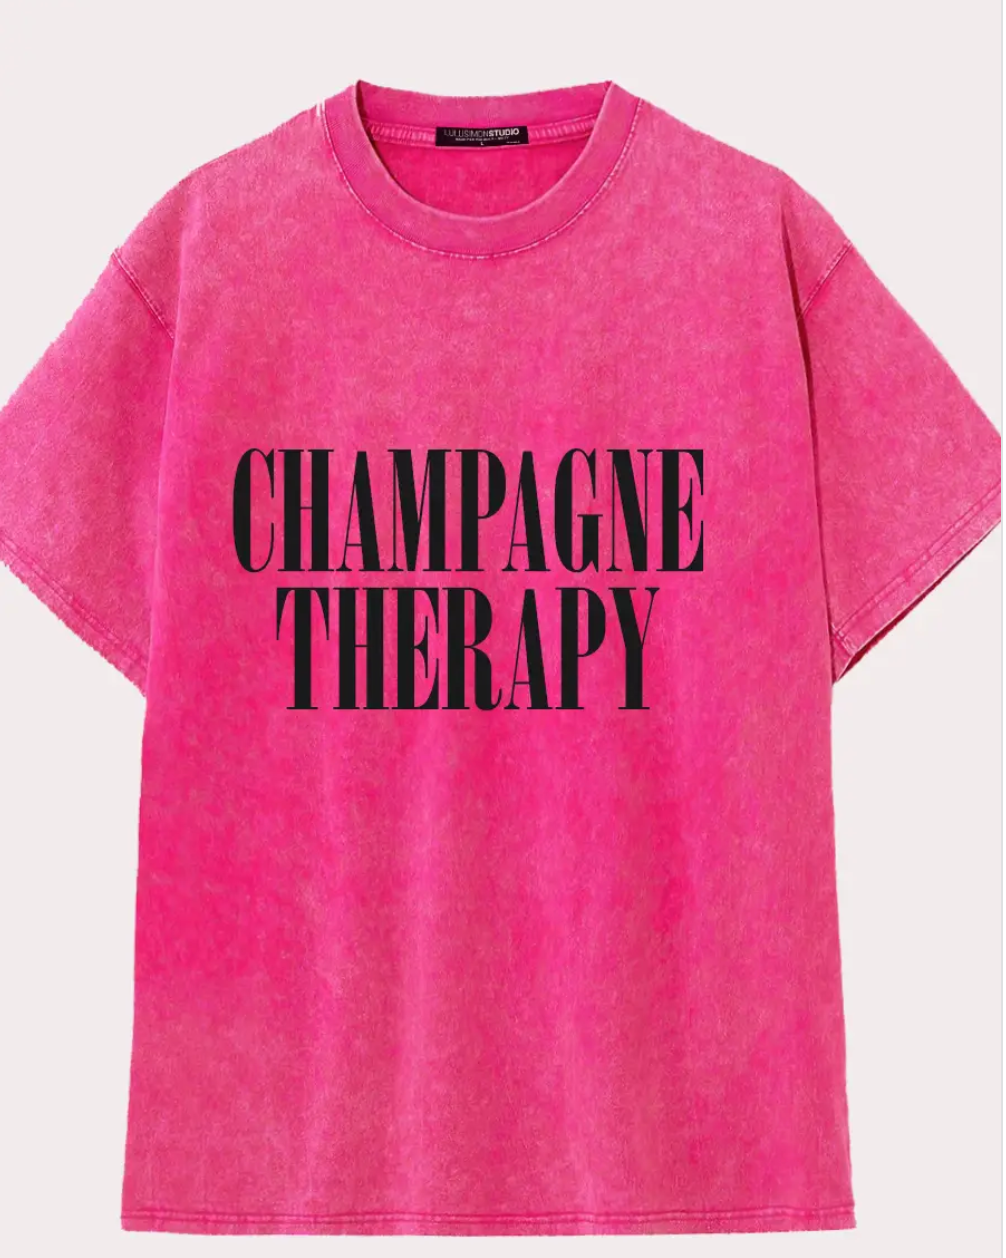 Champagne Therapy Vintage Wash Tee